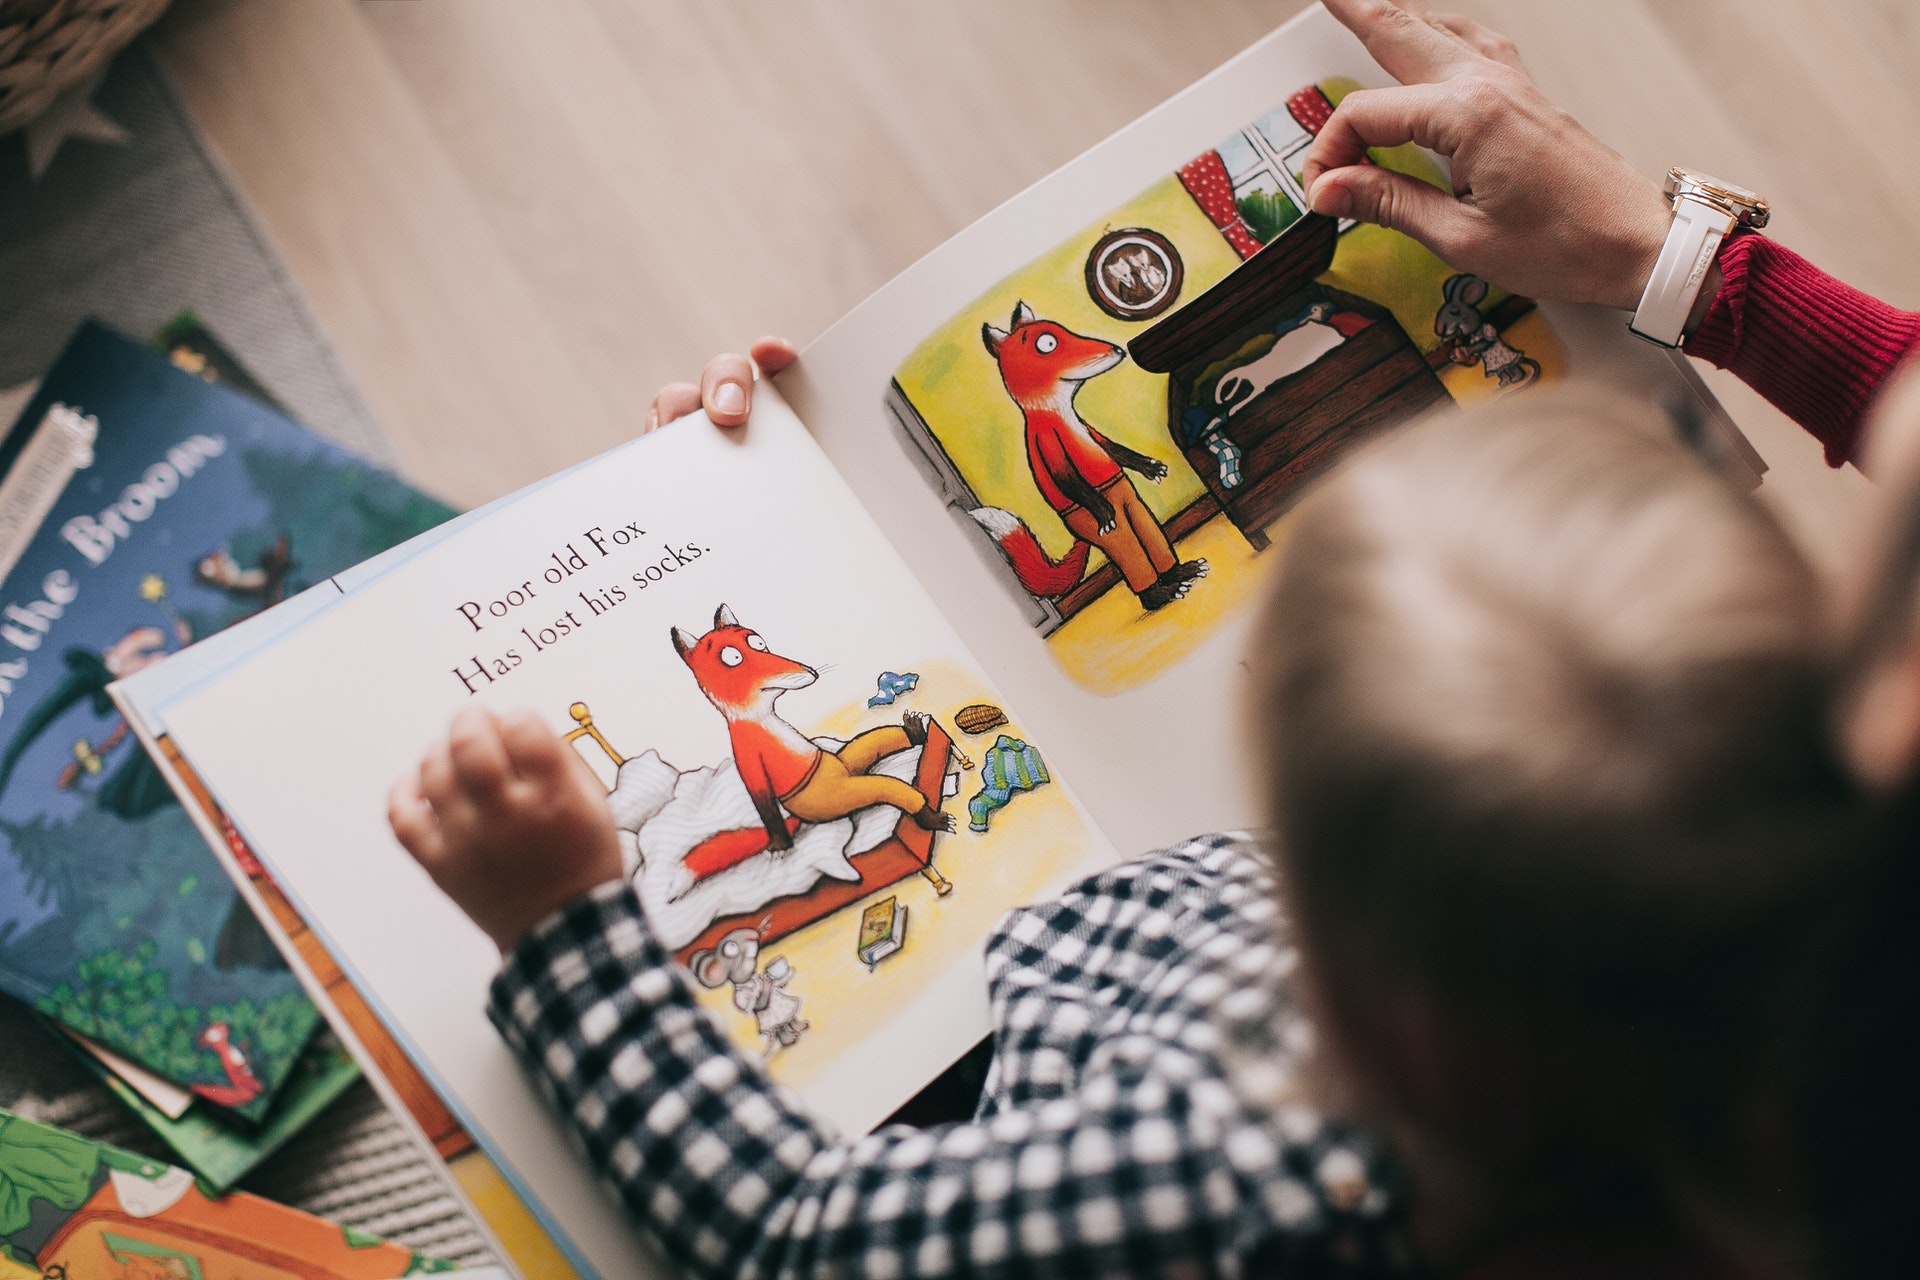 how to teach kids to read